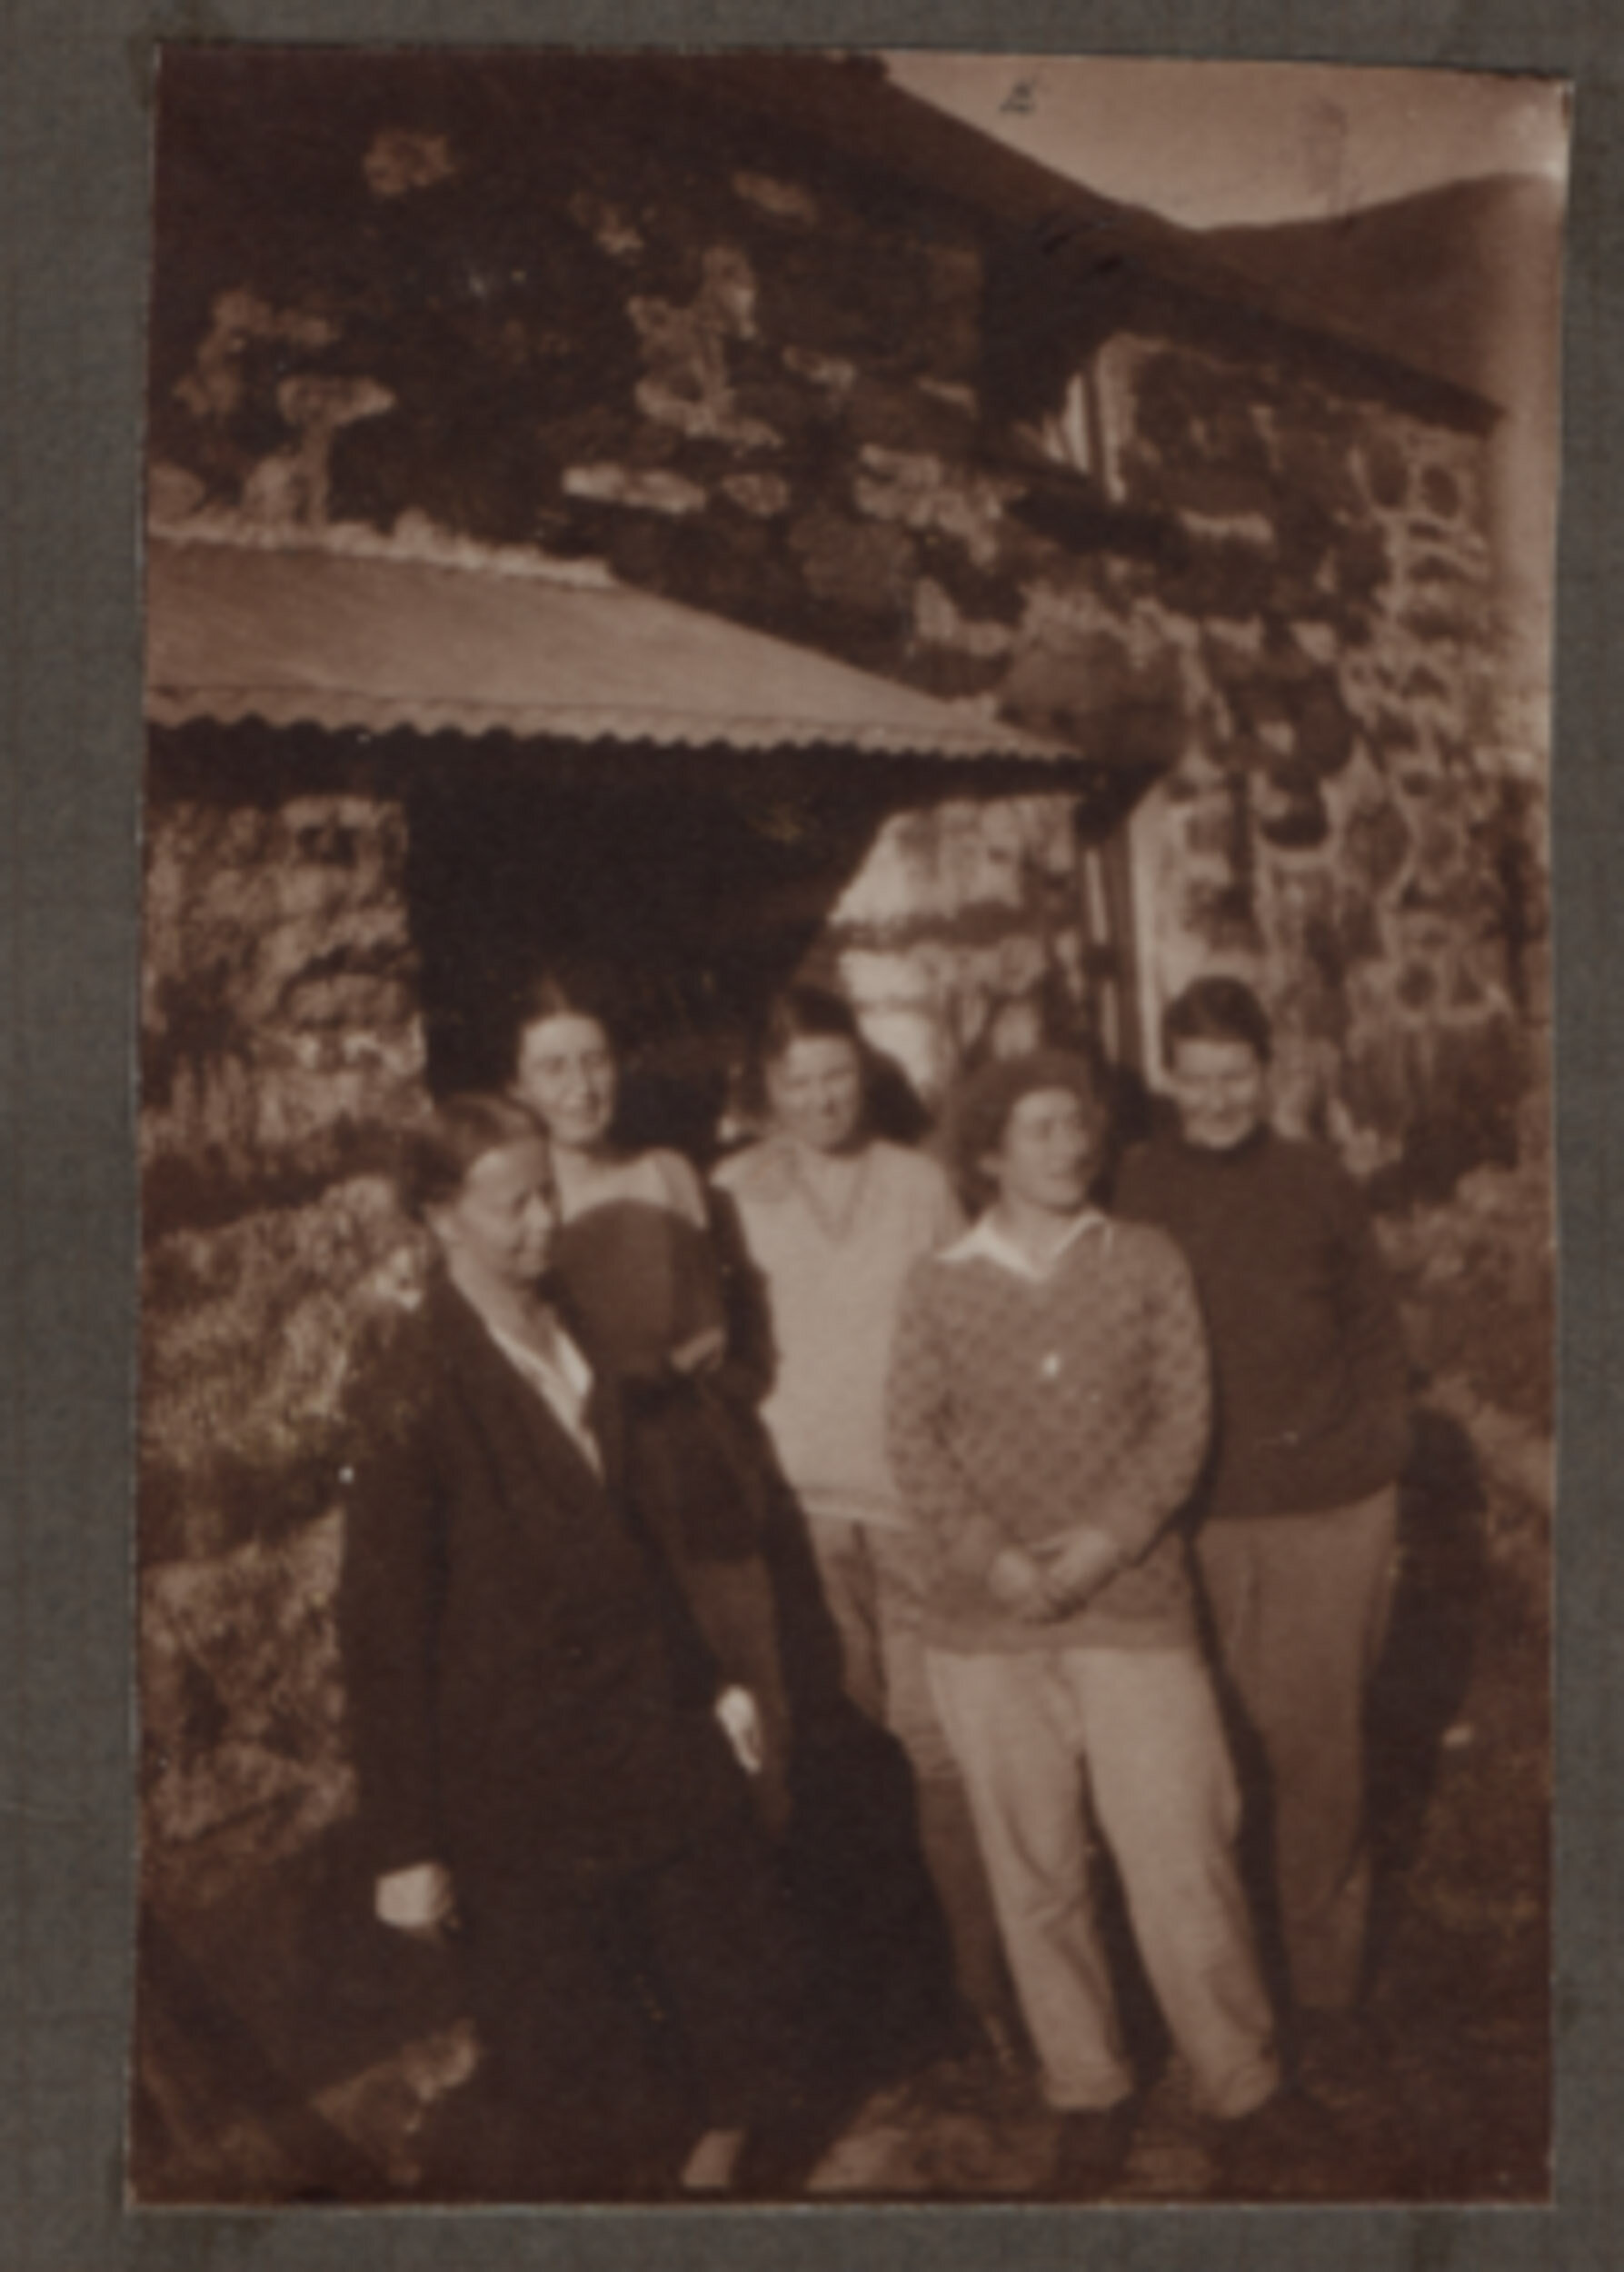 Dr Catherine Corbett, Blanche Eden-Smith and others at the first hut meet in 1932